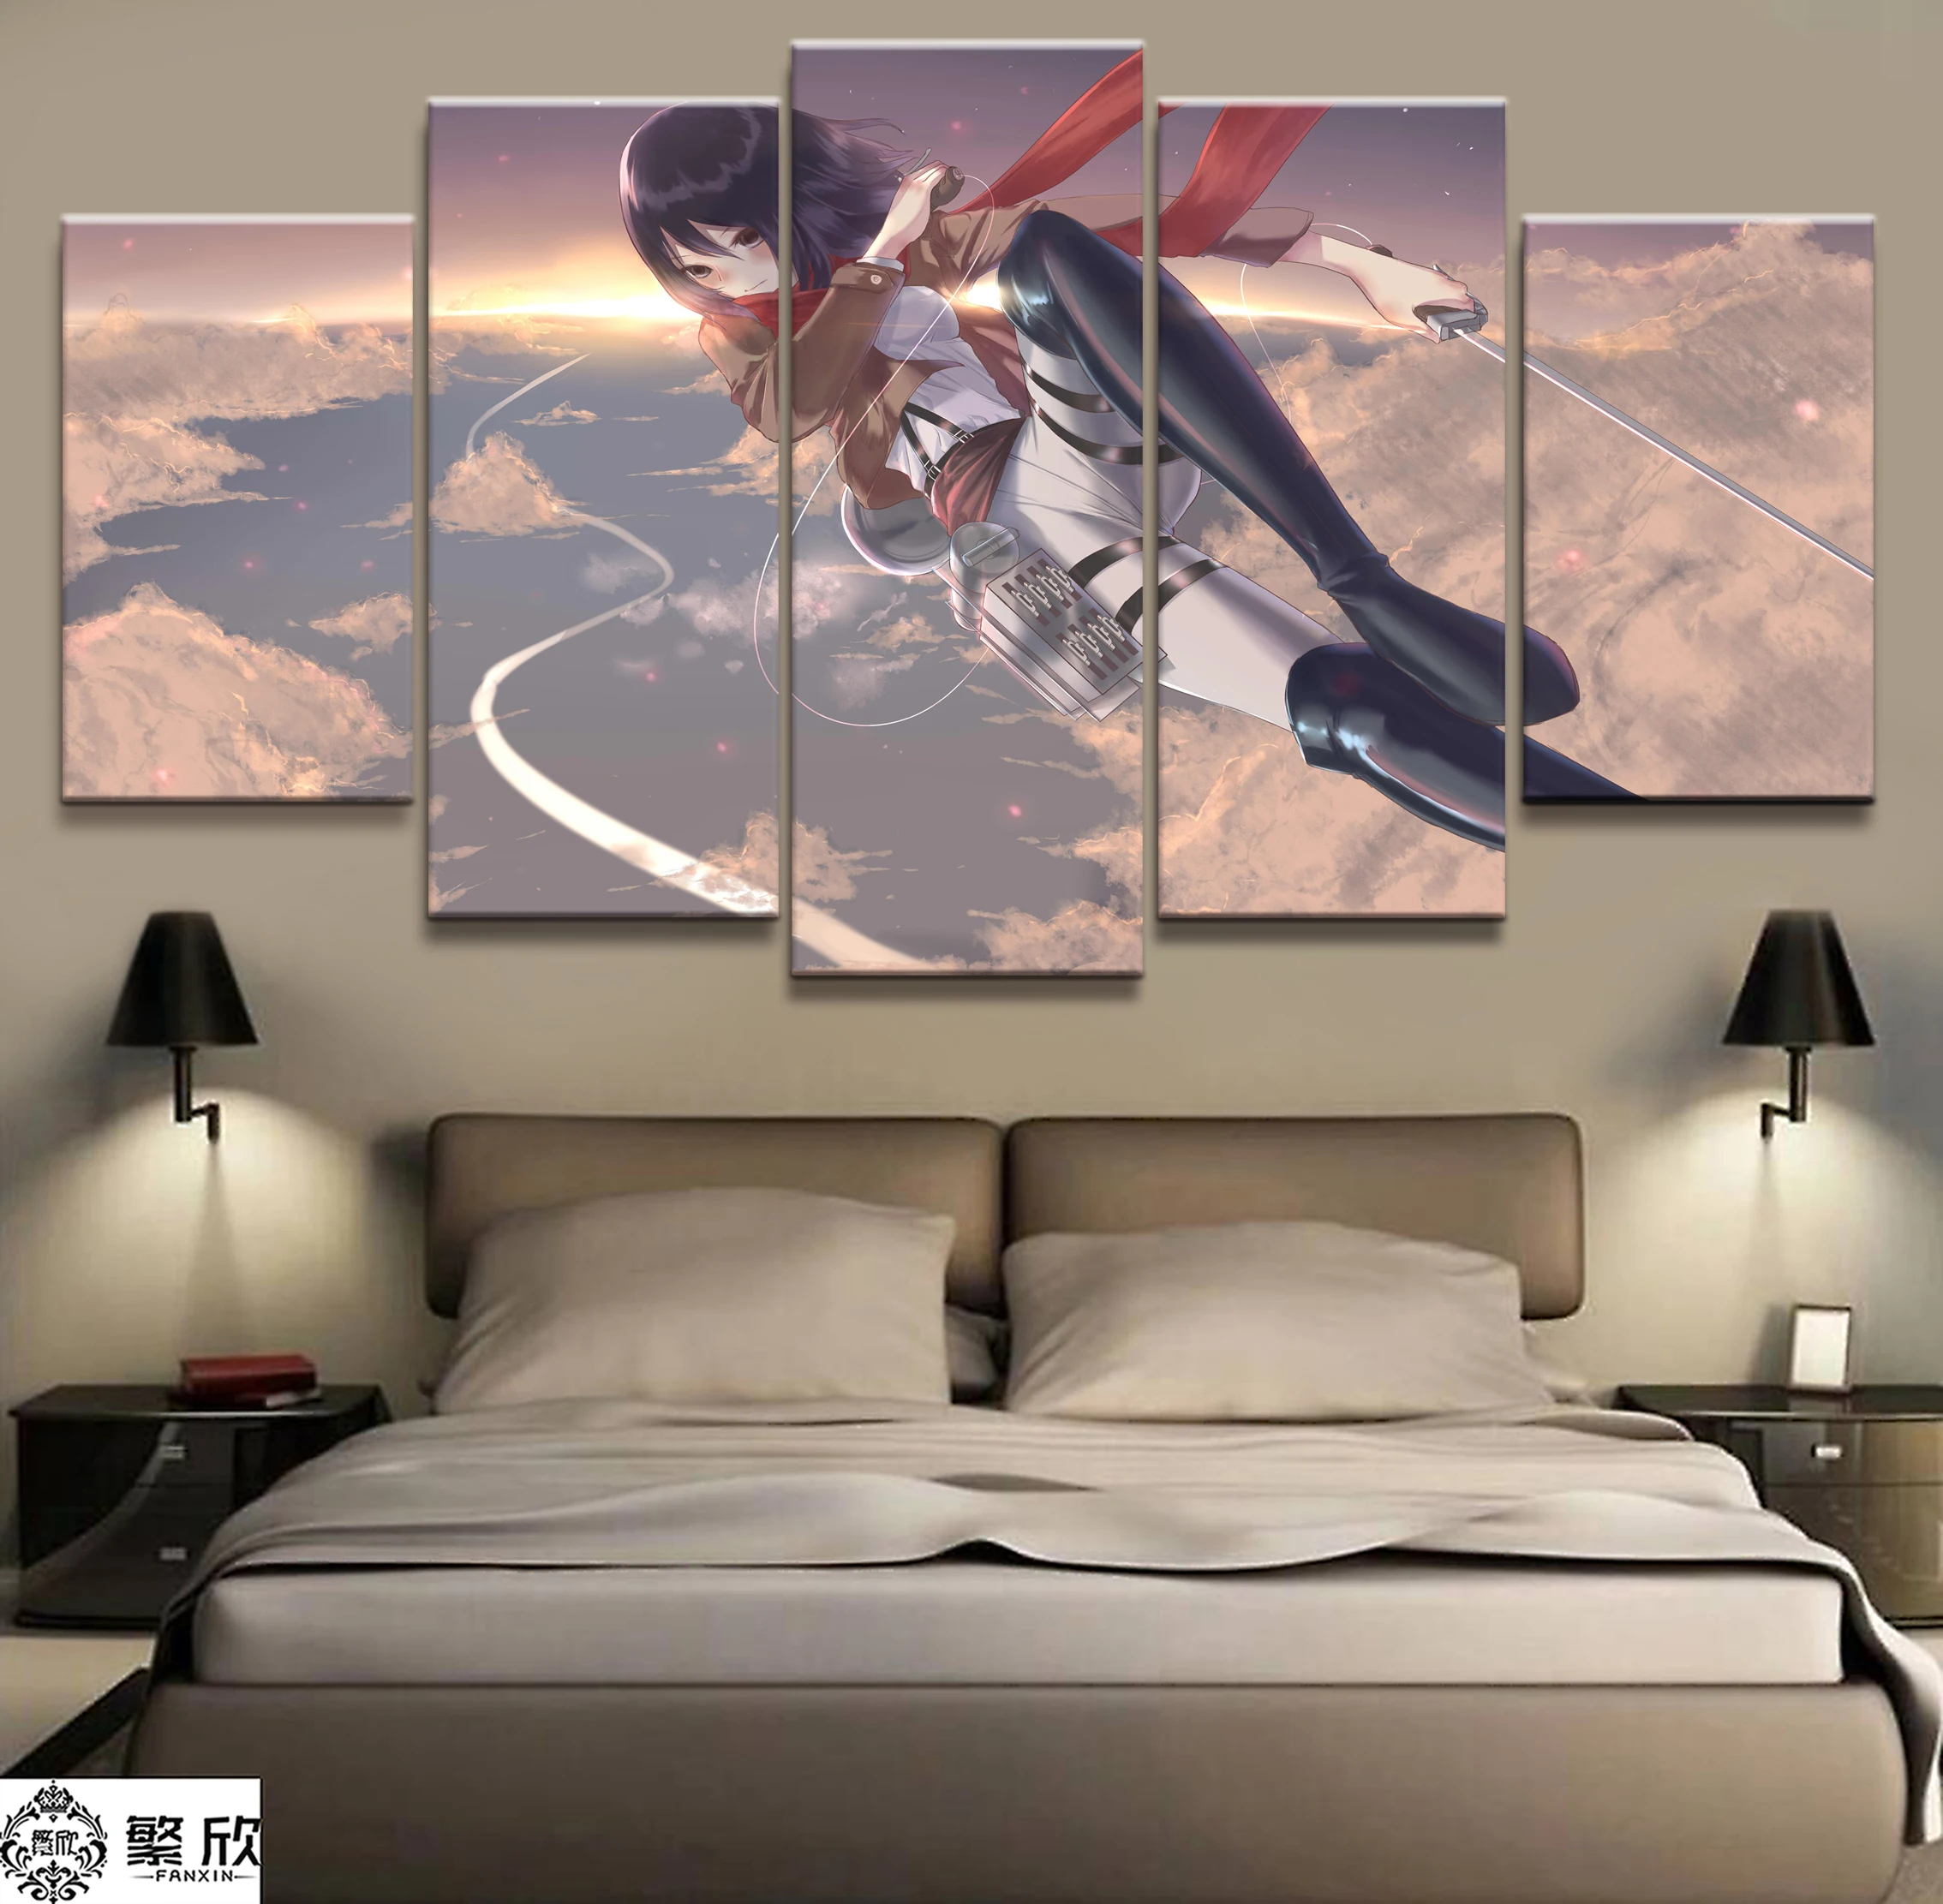 

Printed Modular Pictures Framework Canvas 5 Panel Anime Attack on Titan Characters Poster Home Decor Wall Art Oil Painting